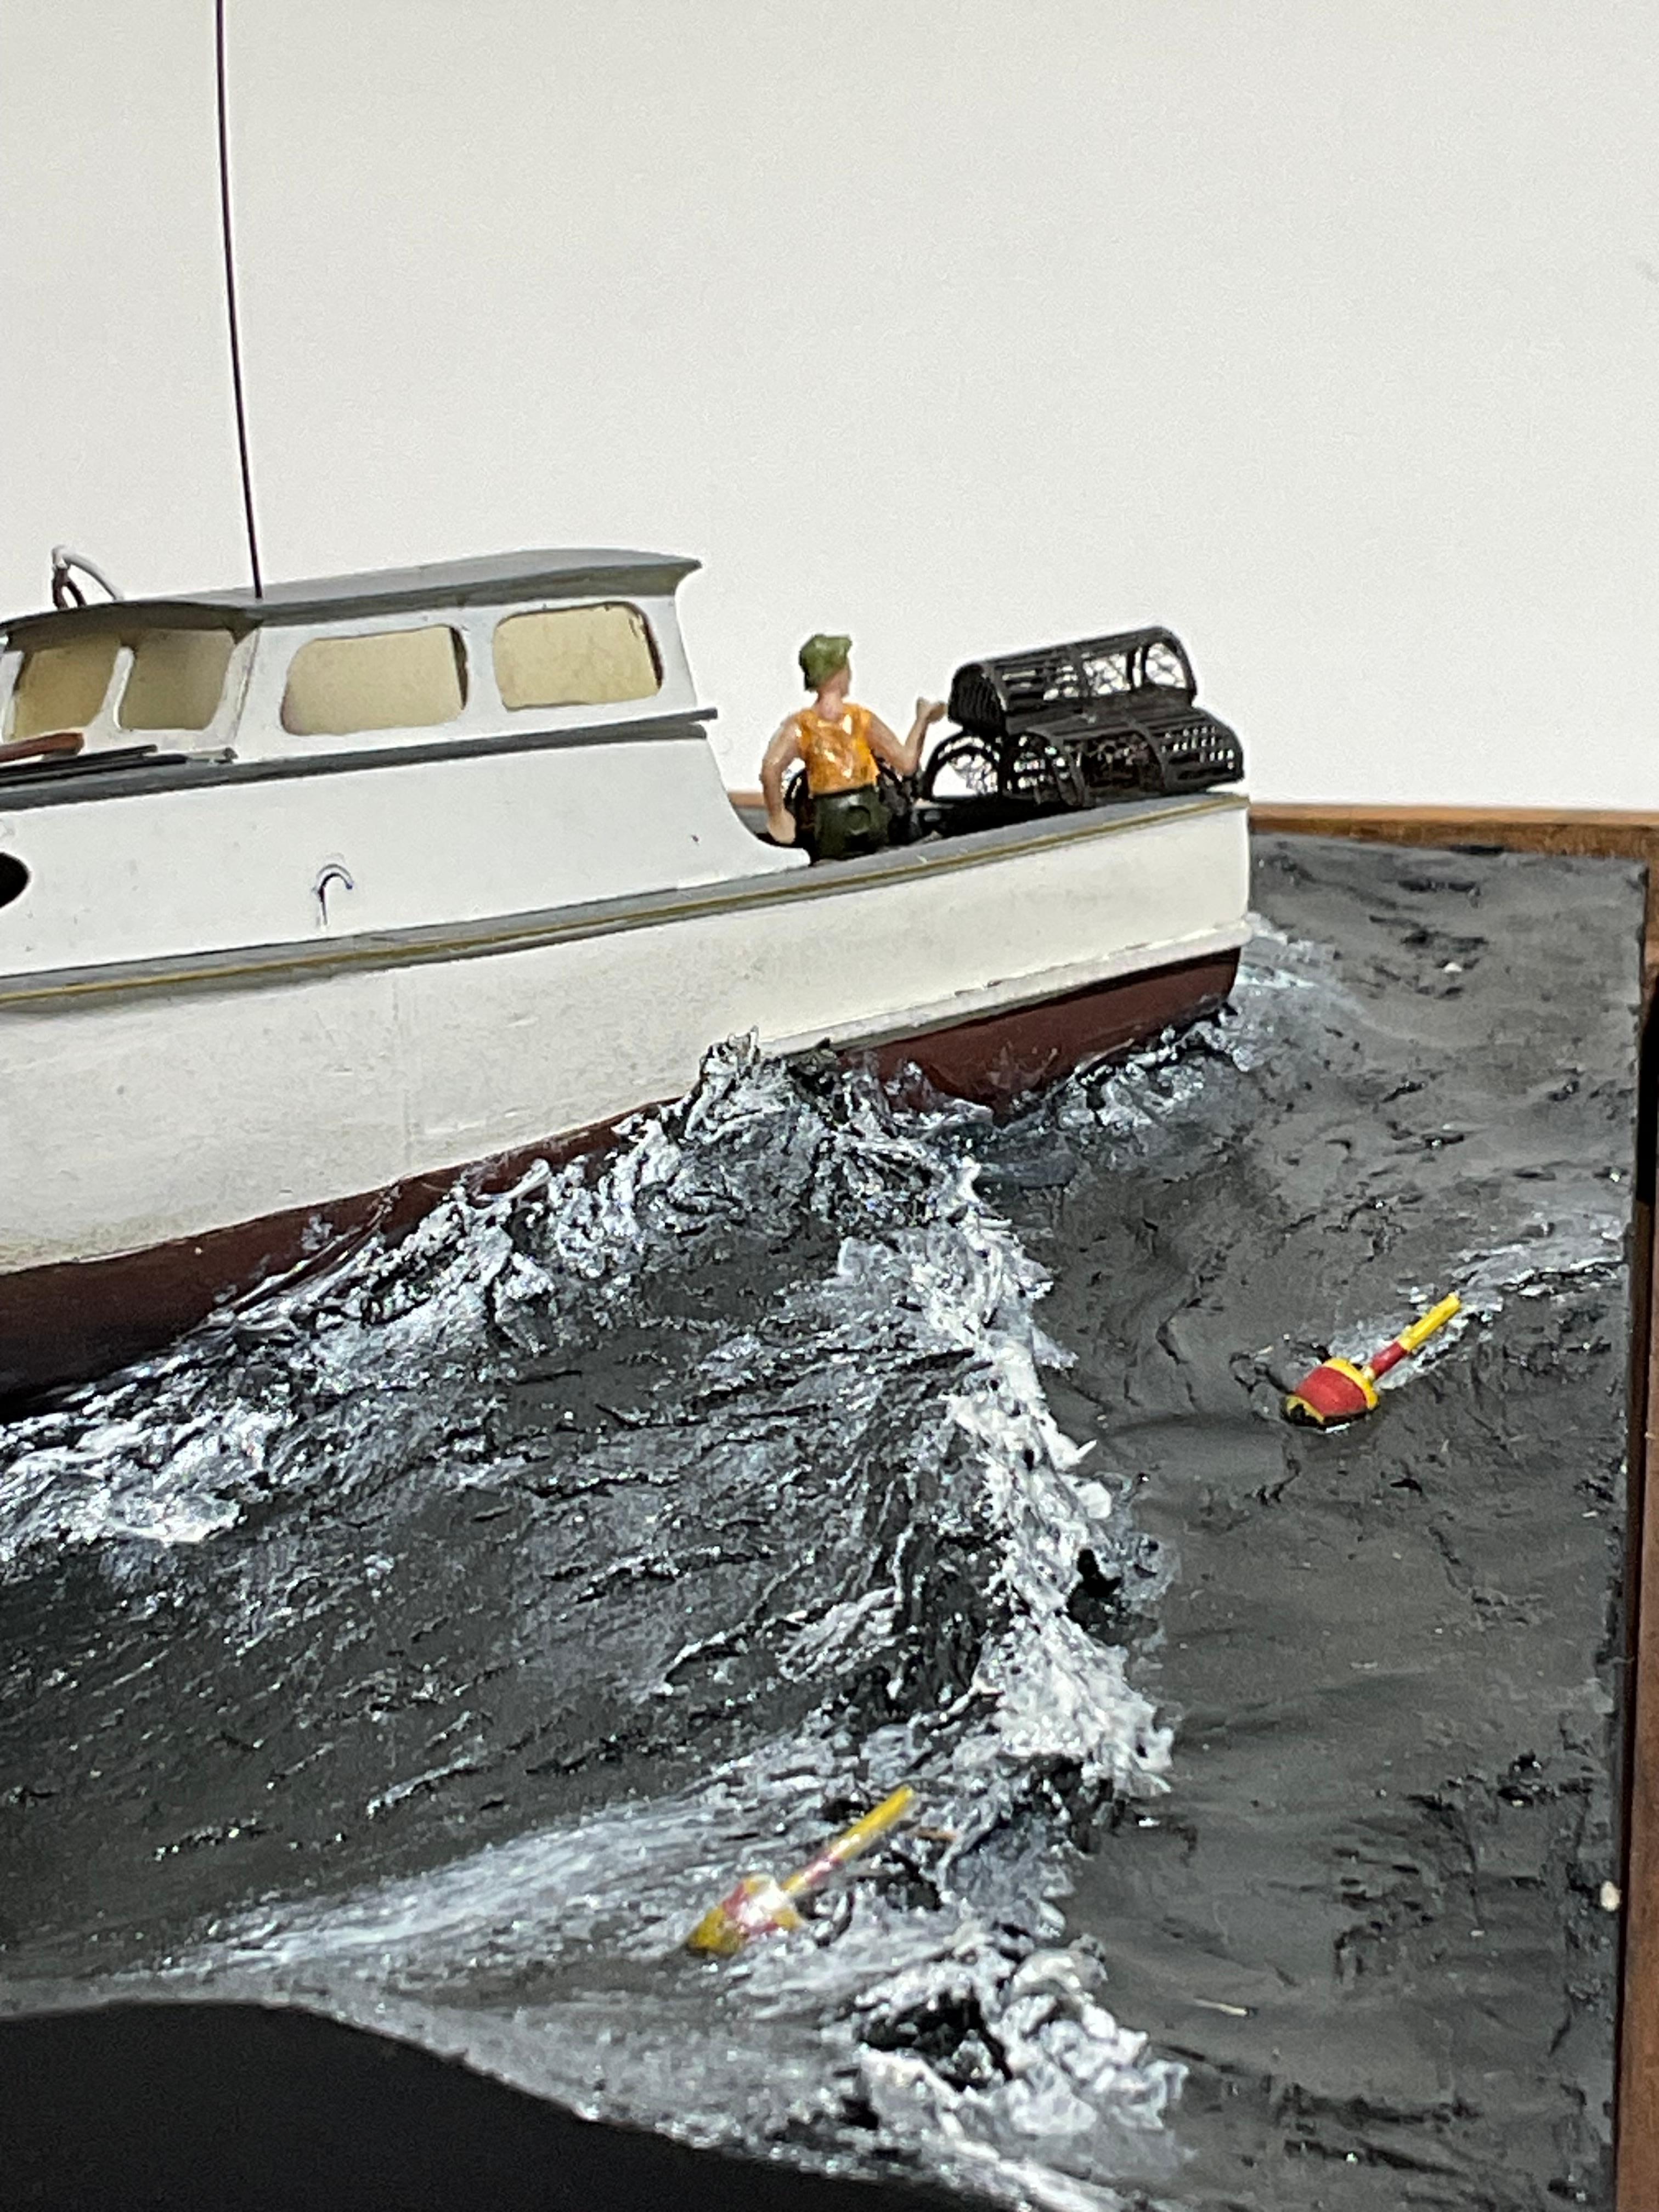 Lobster Boat Diorama Titled 